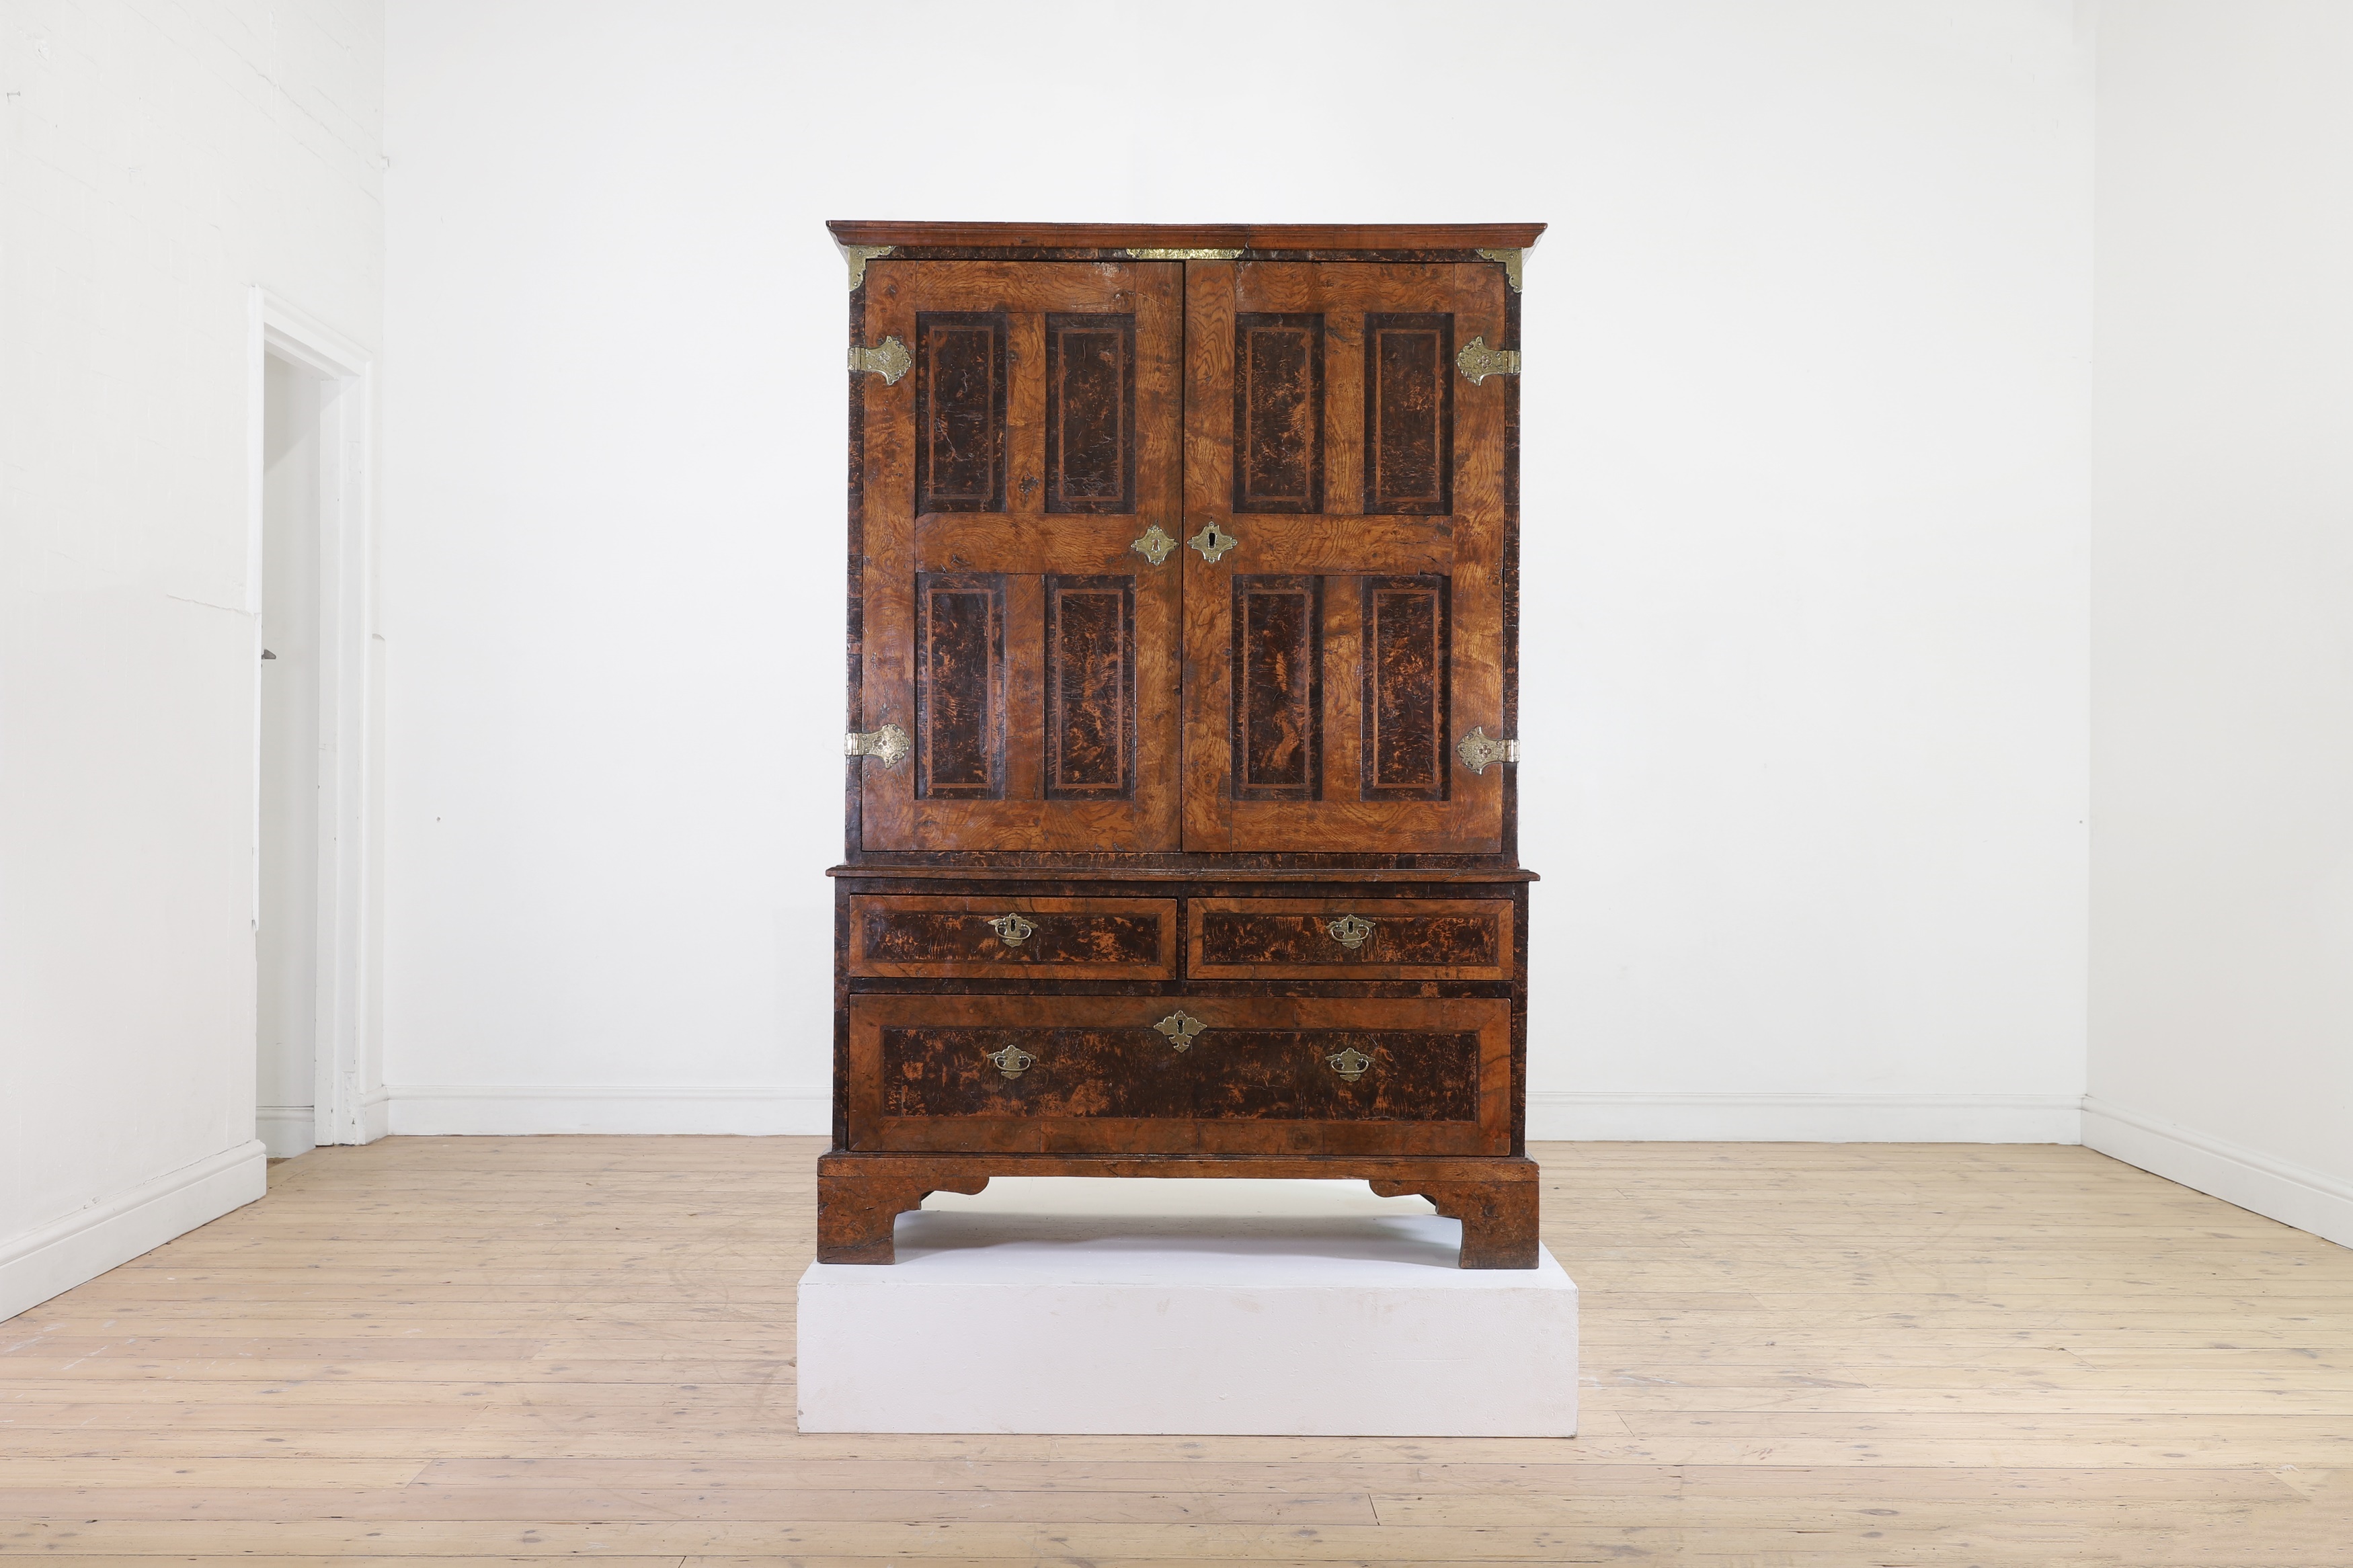 A George I oak and mulberry cabinet (£3,000-5,000)